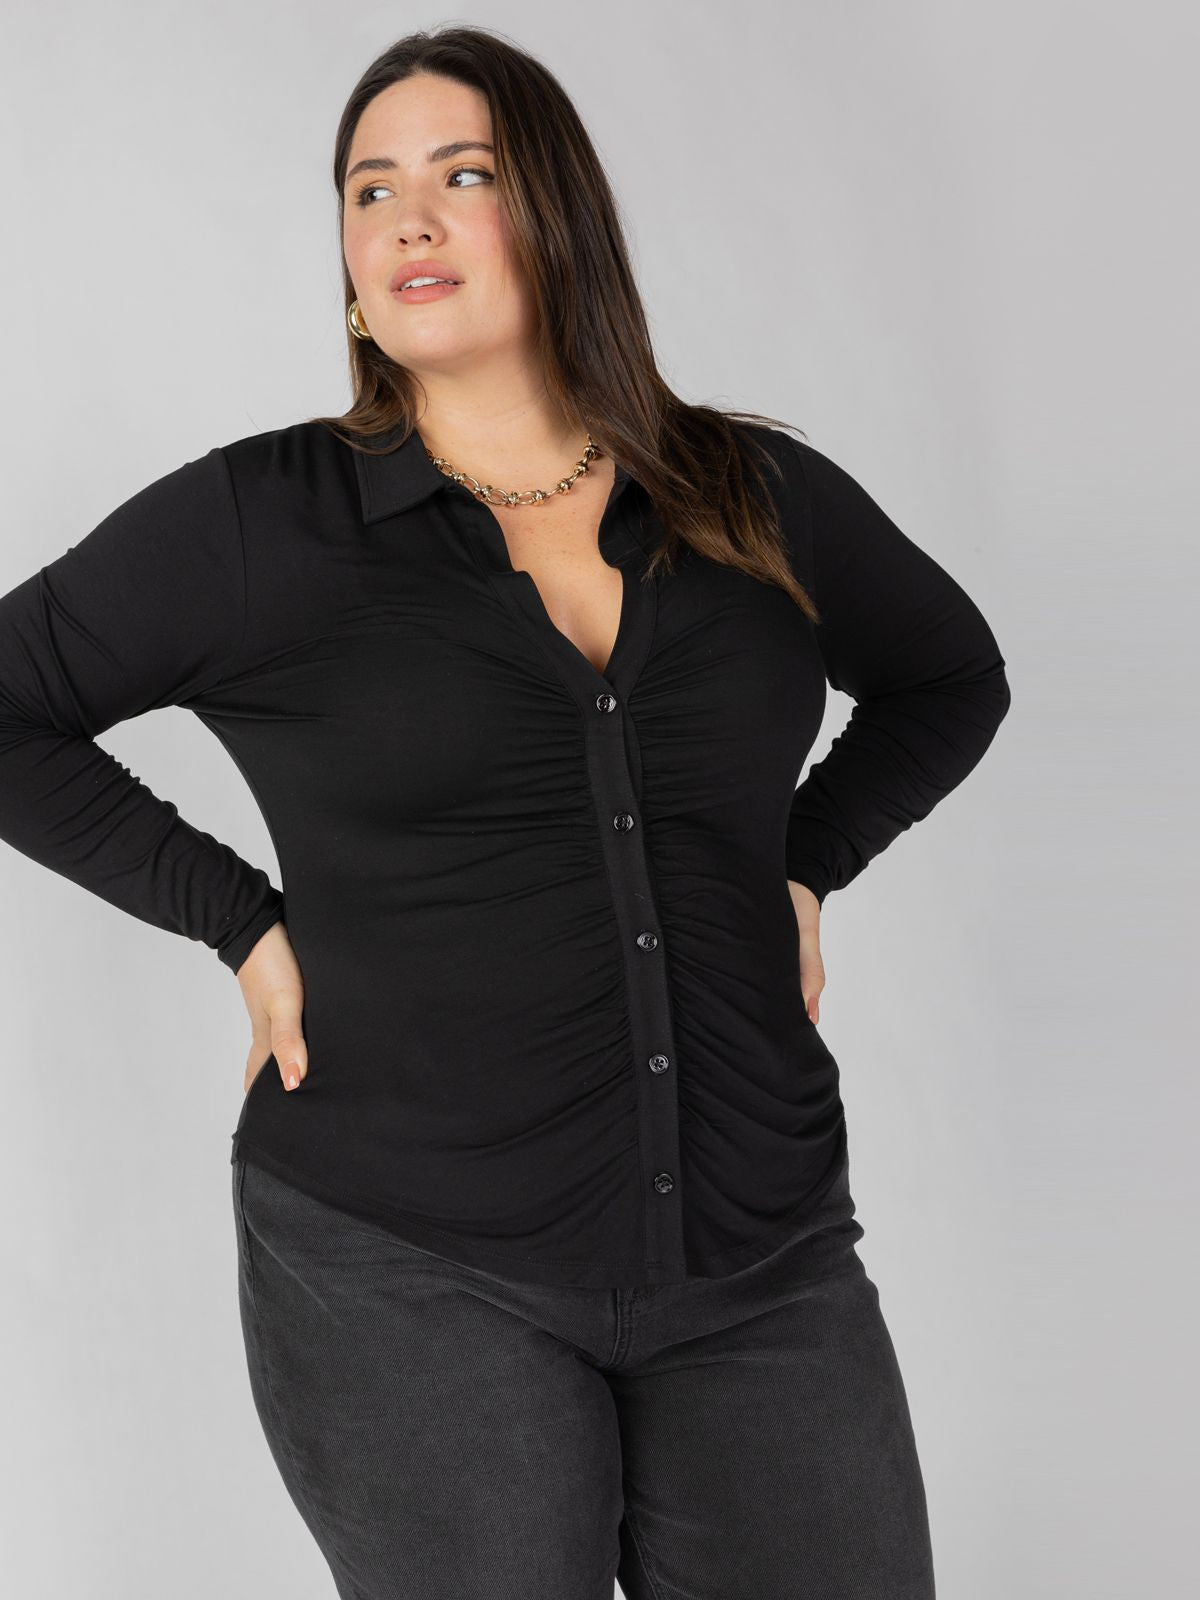 Dreamgirl Knit Button Up Top Black Inclusive Collection